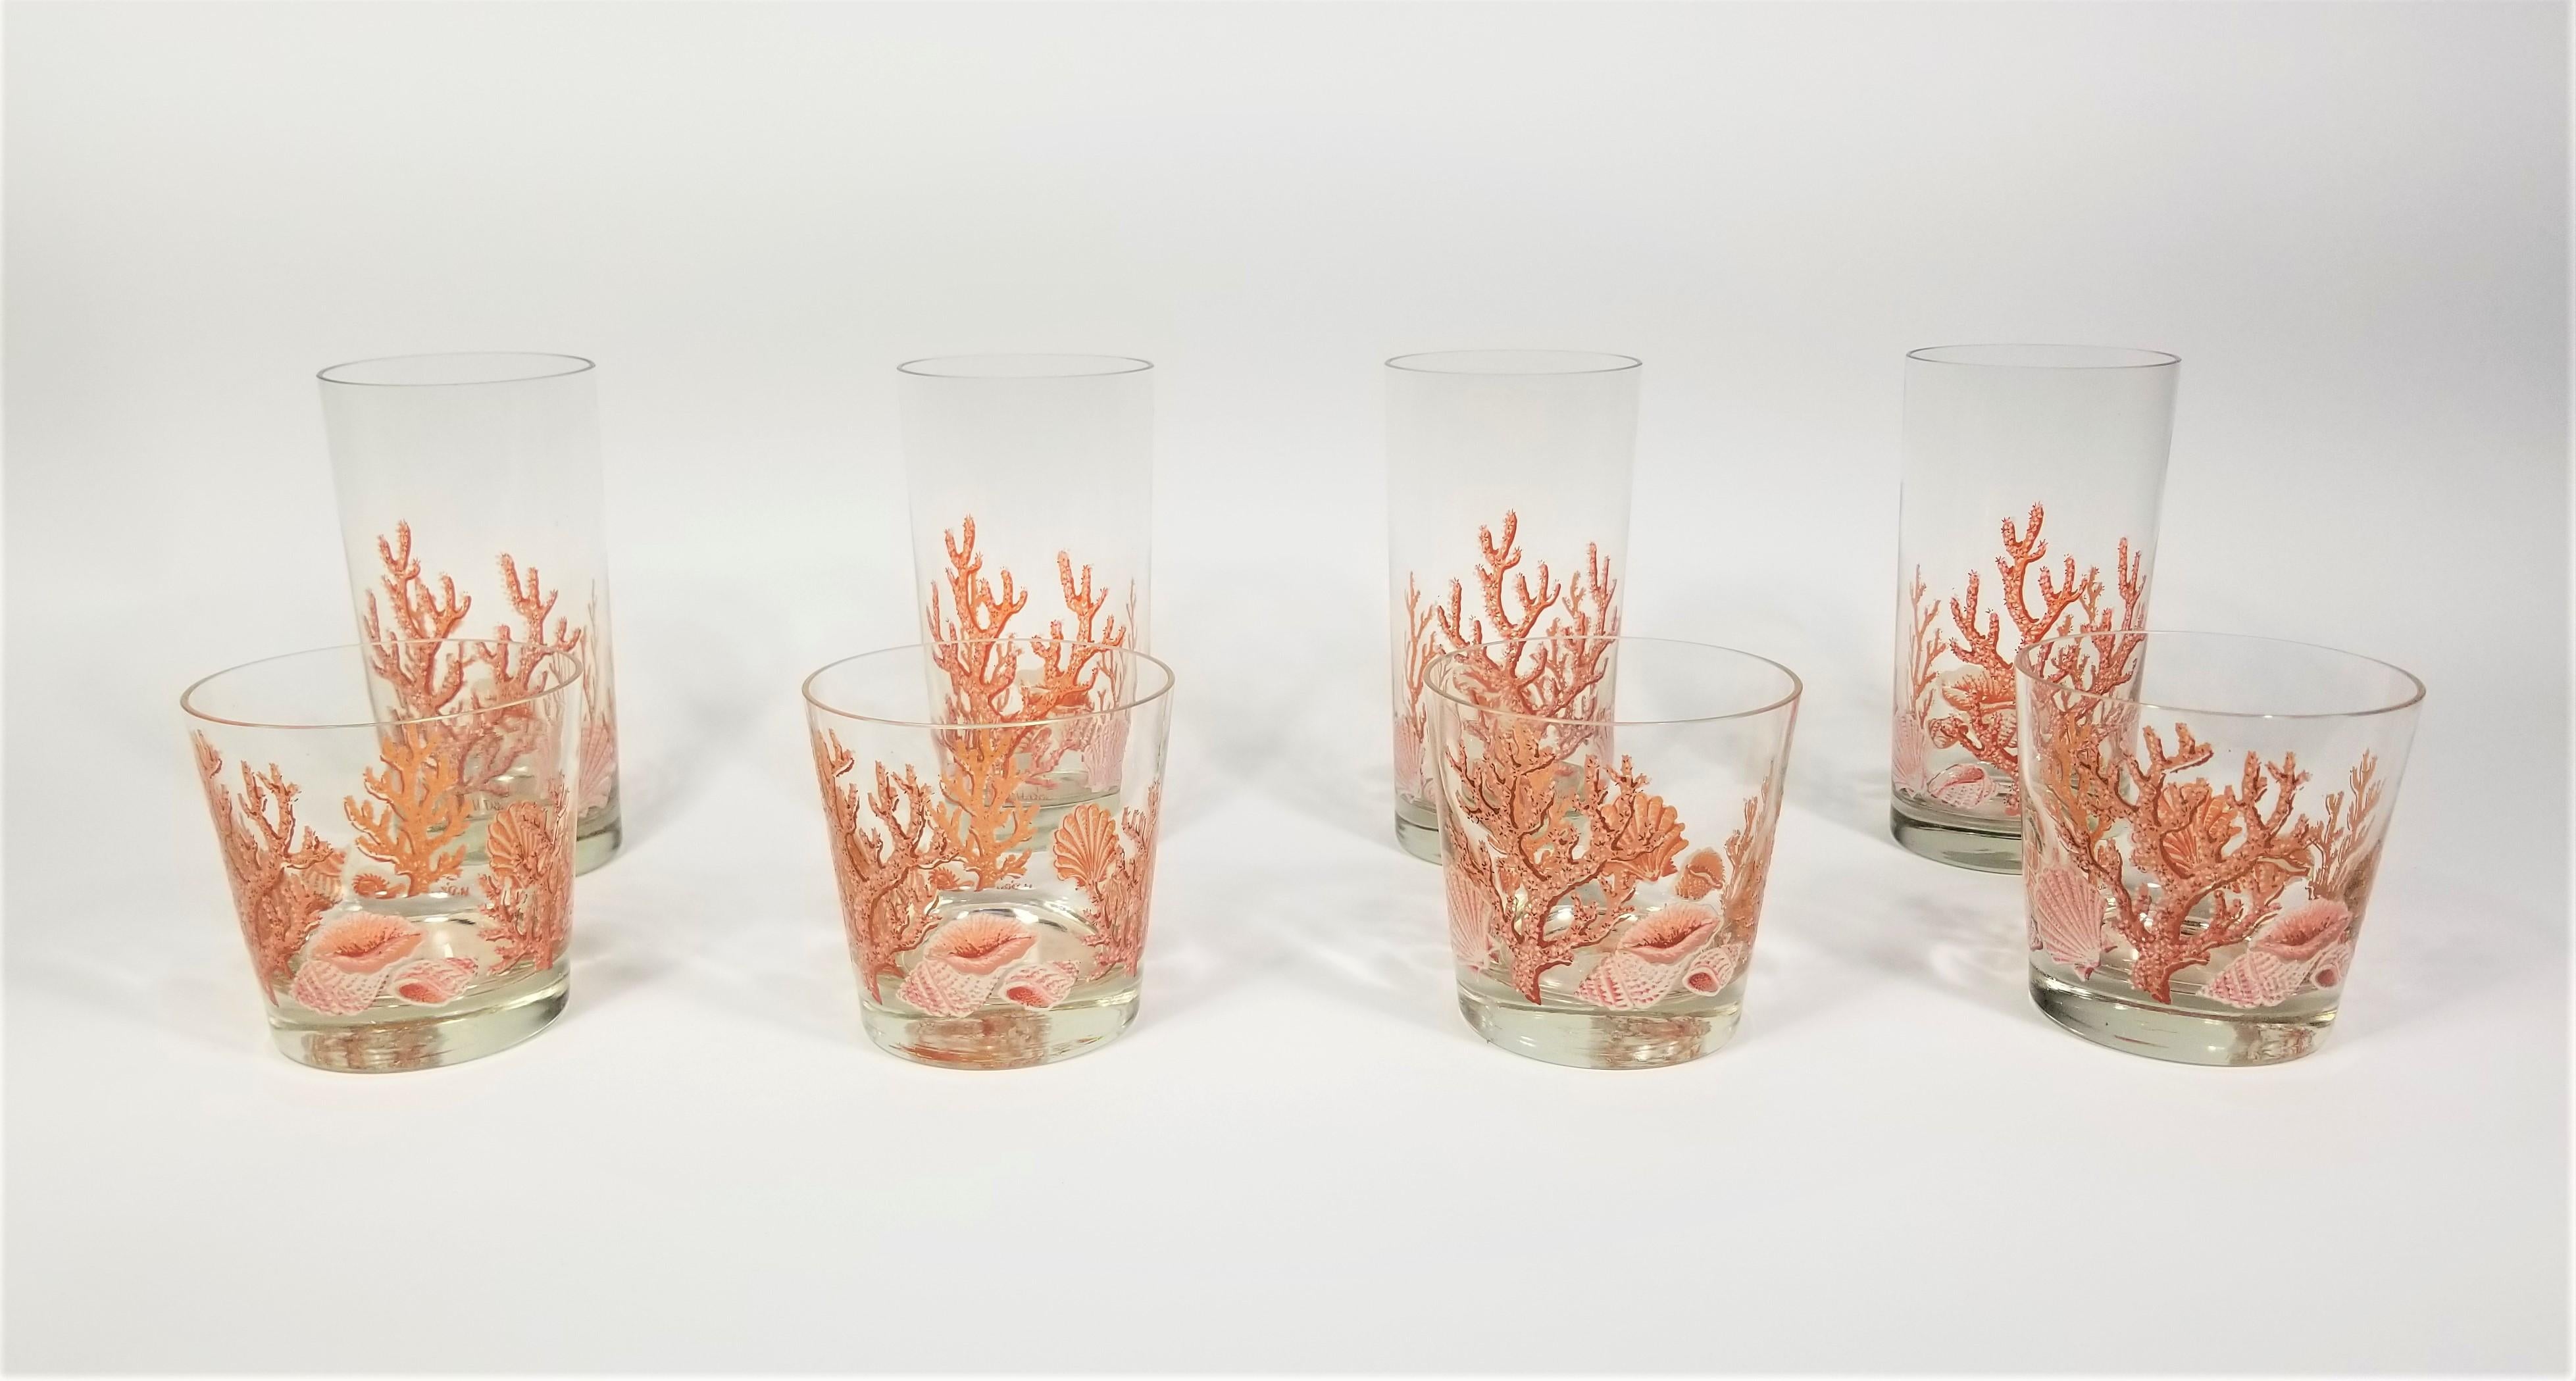 Rare Mid Century 1970s 1980s Libbey Glassware Barware. All glasses are artist signed M.Dia. All glasses are marked with Libbey marking on bottom. Coral and Seashell or Beach motif. 4 rocks glasses and 4 tall glasses for total of 8. Excellent